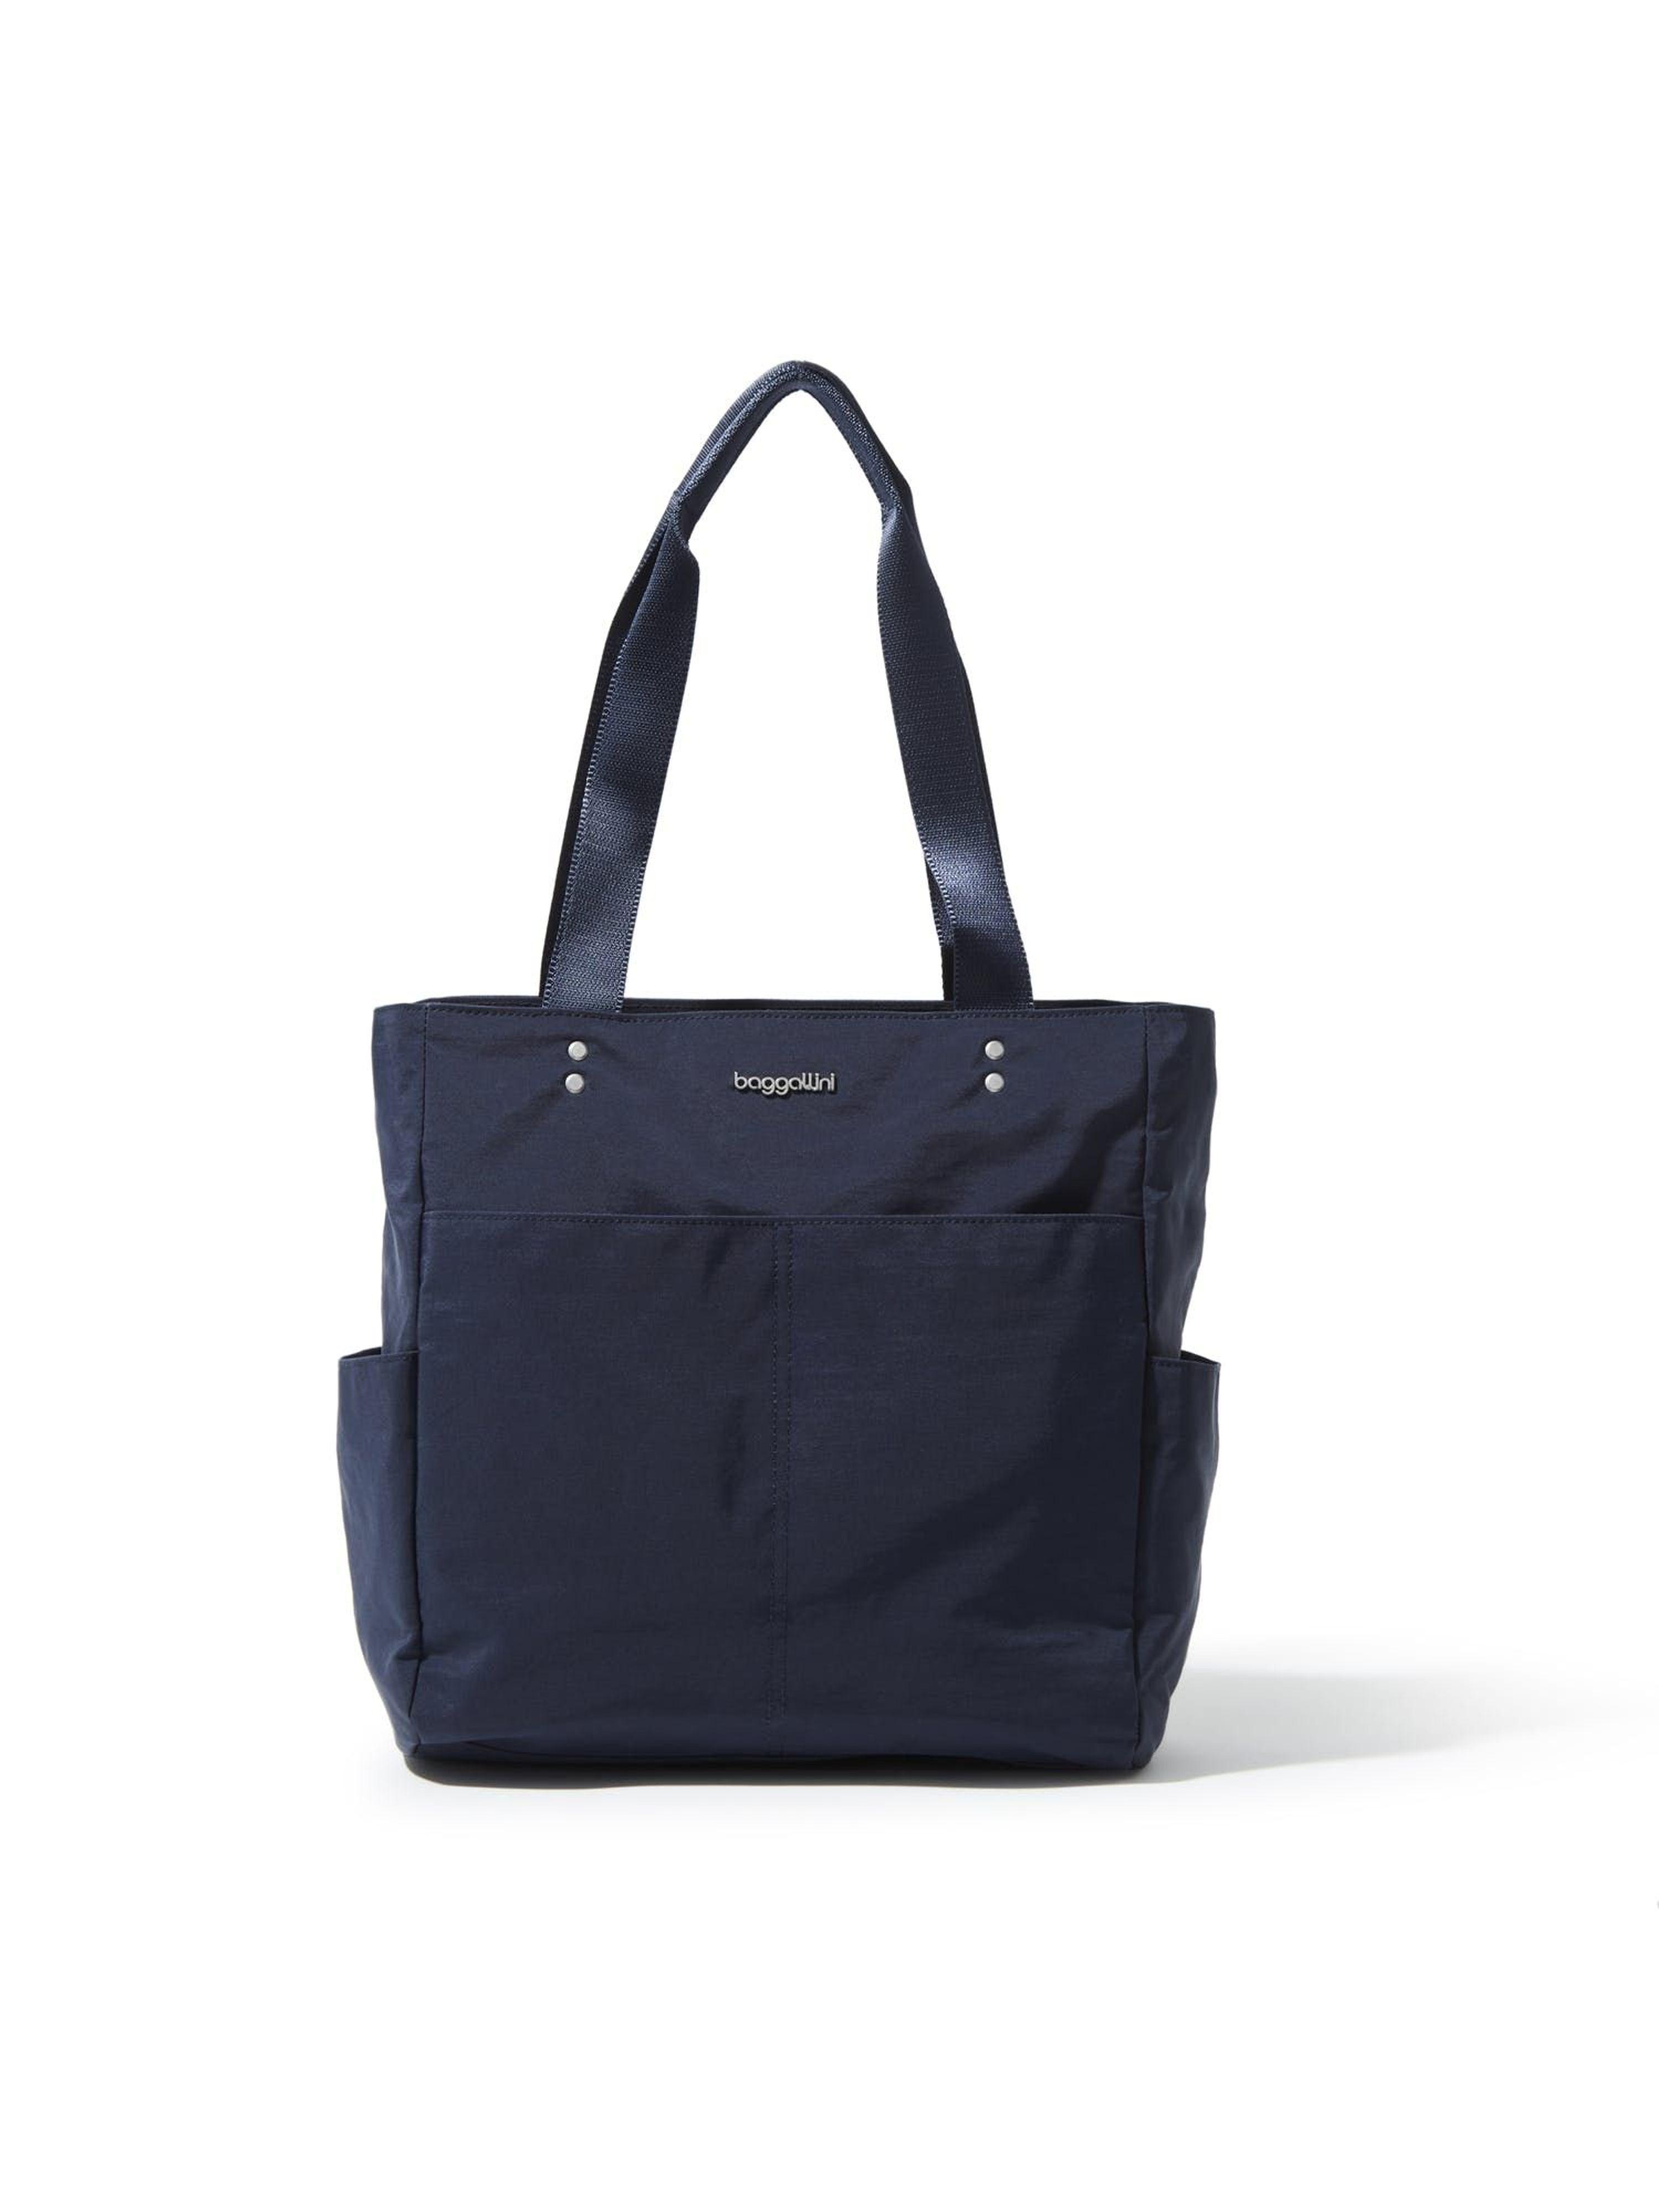 Baggallini Carryall Daily Tote Bag in Blue | Lyst